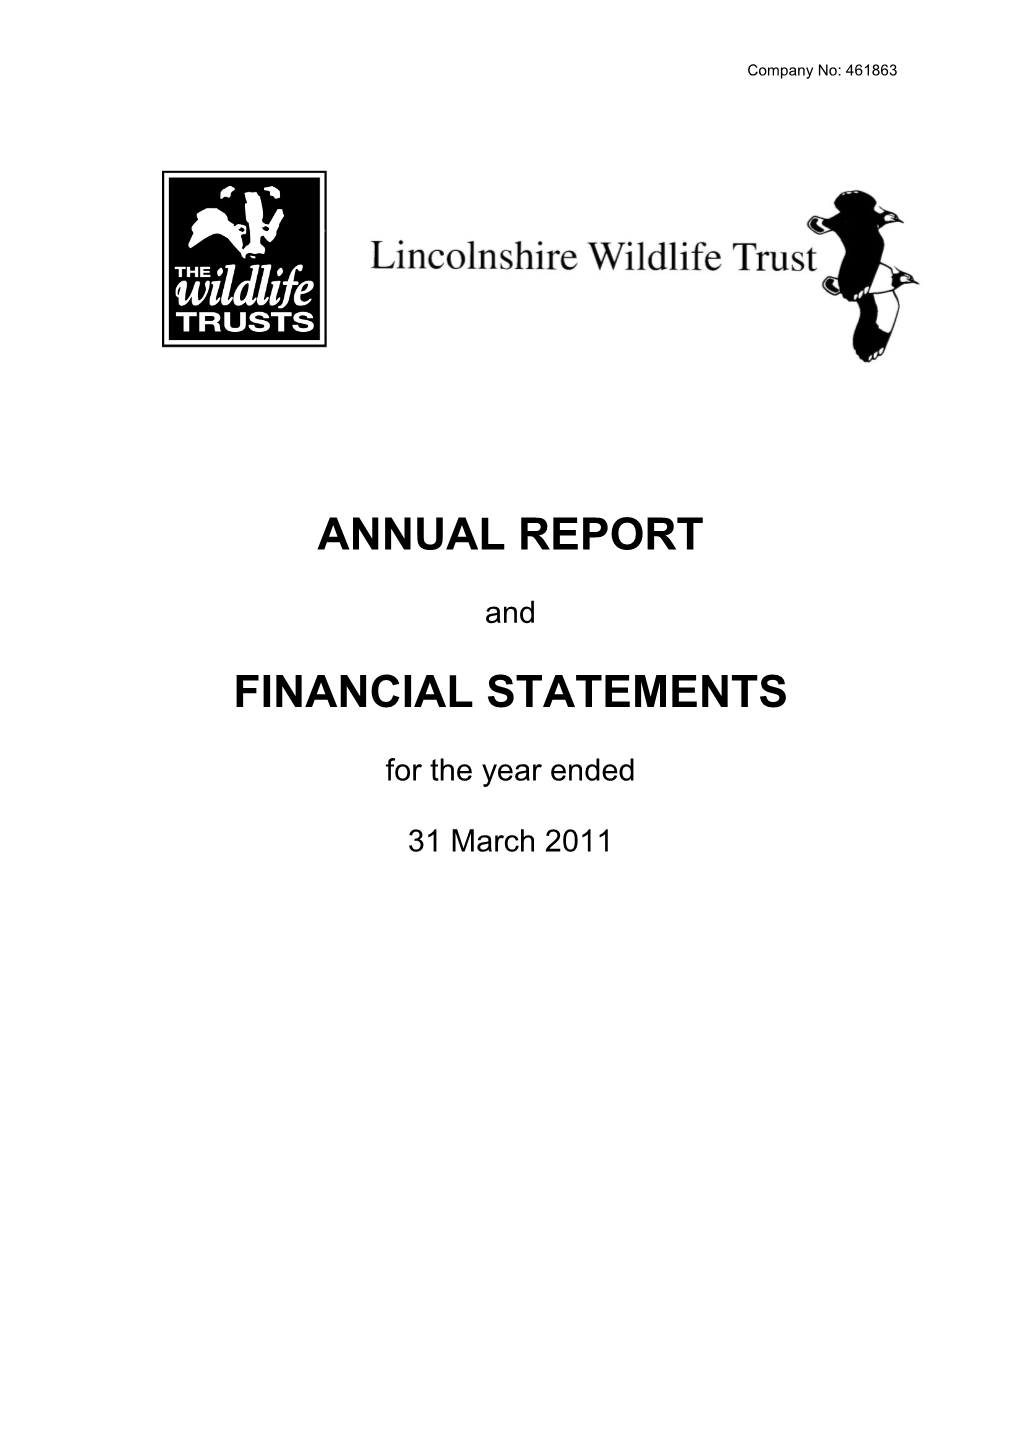 Annual Report Financial Statements